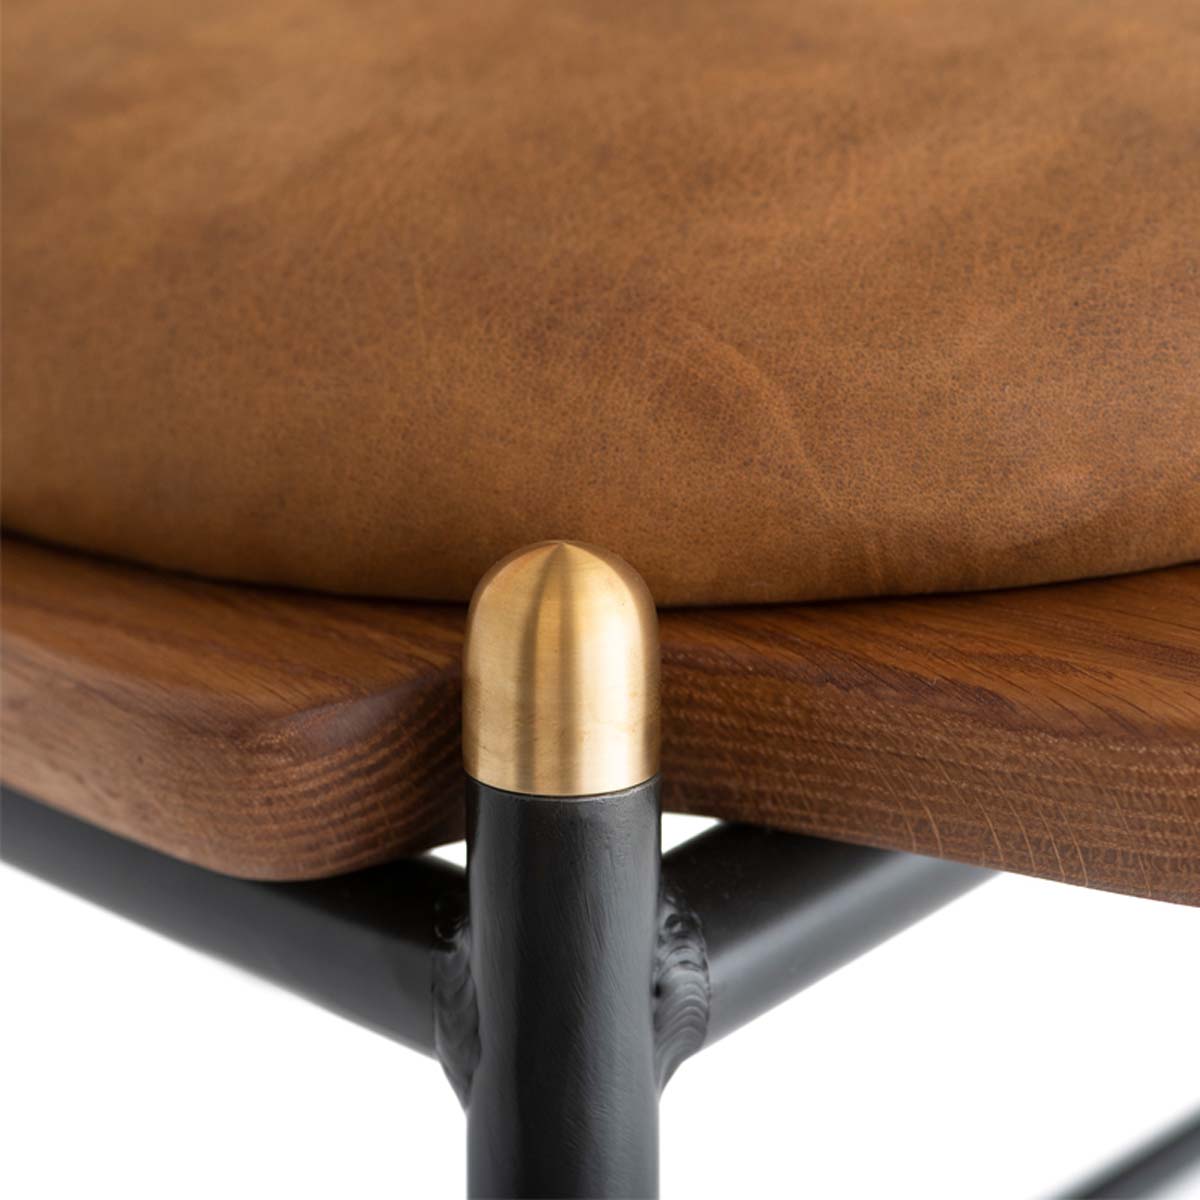 District Eight Kink Dining Chair - Umber Tan